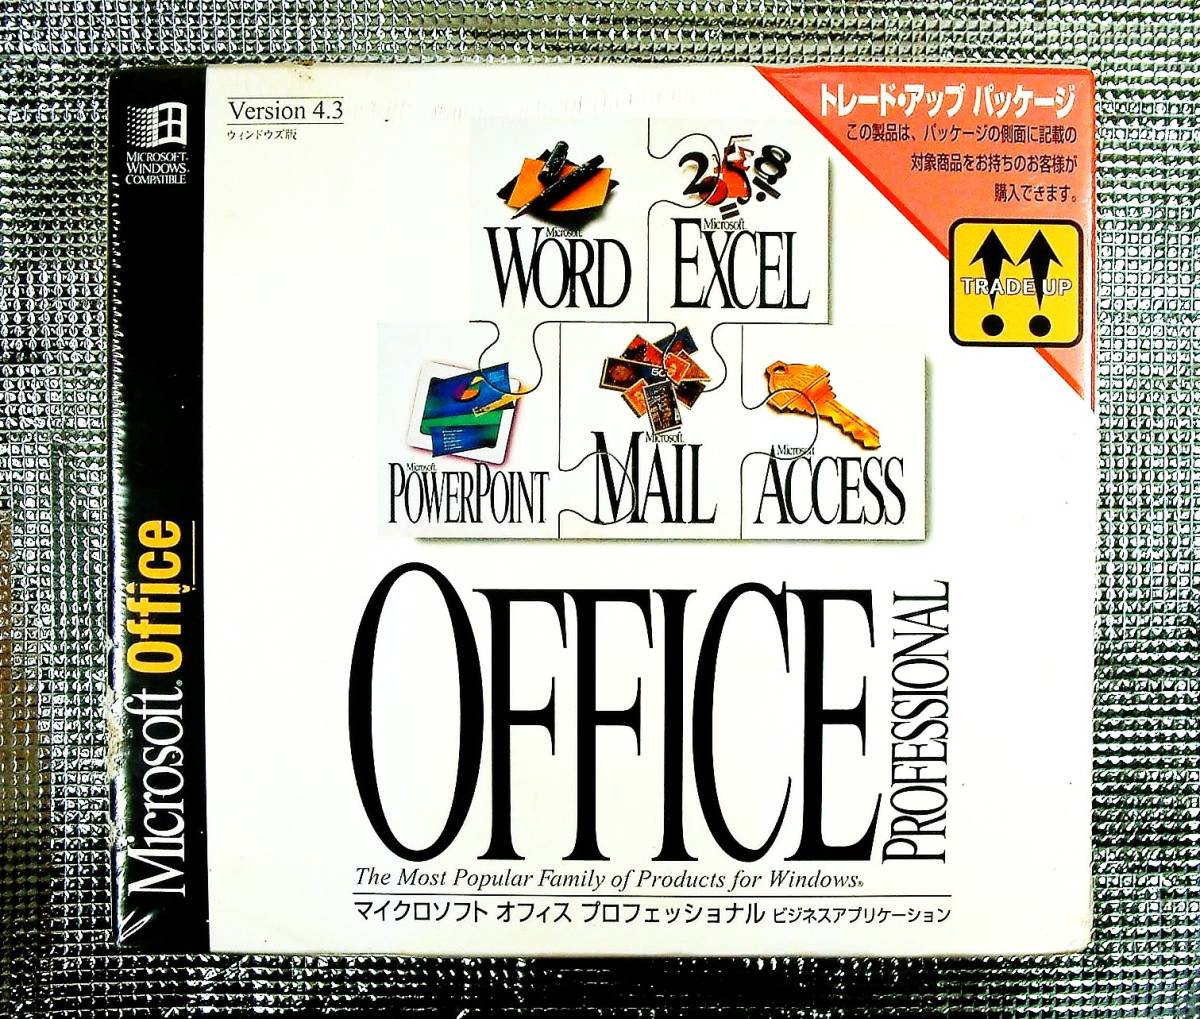 【4440】Microsoft Office 4.3 Professional トレードUP版 未開封品 マイクロソフト 16ビット オフィス PowerPoint Excel Word Access Mail